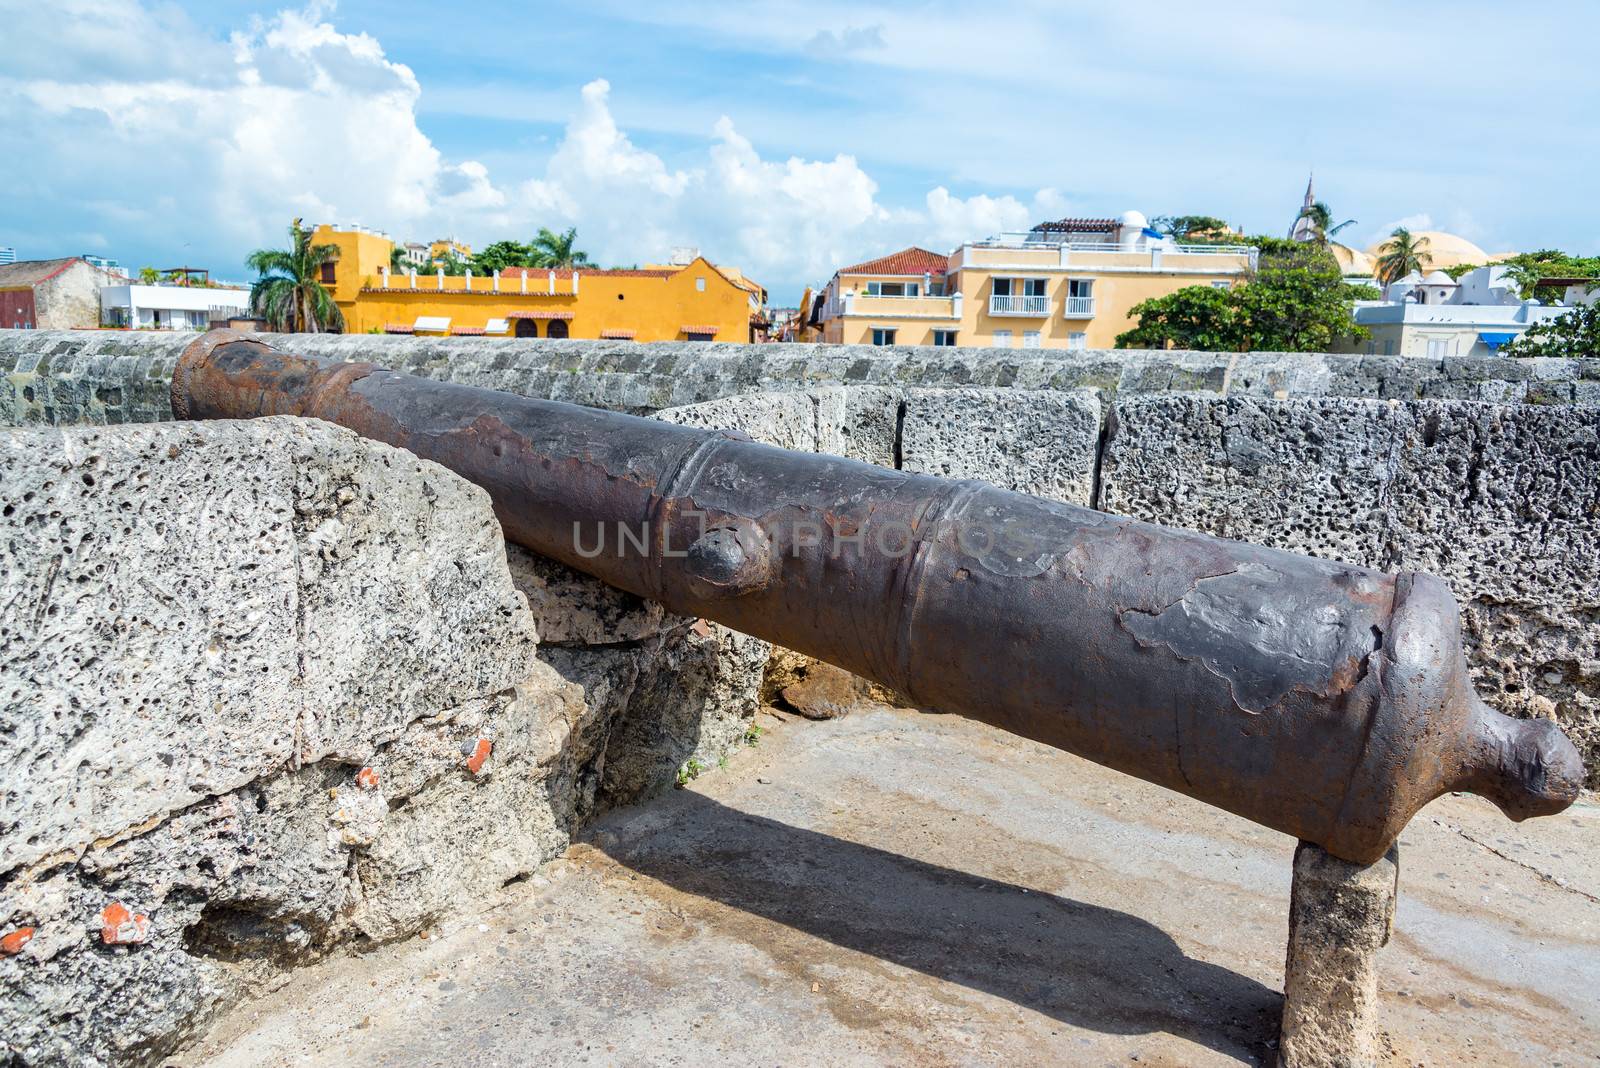 Old historic cannon in the old walled city of Cartagena, Colombia